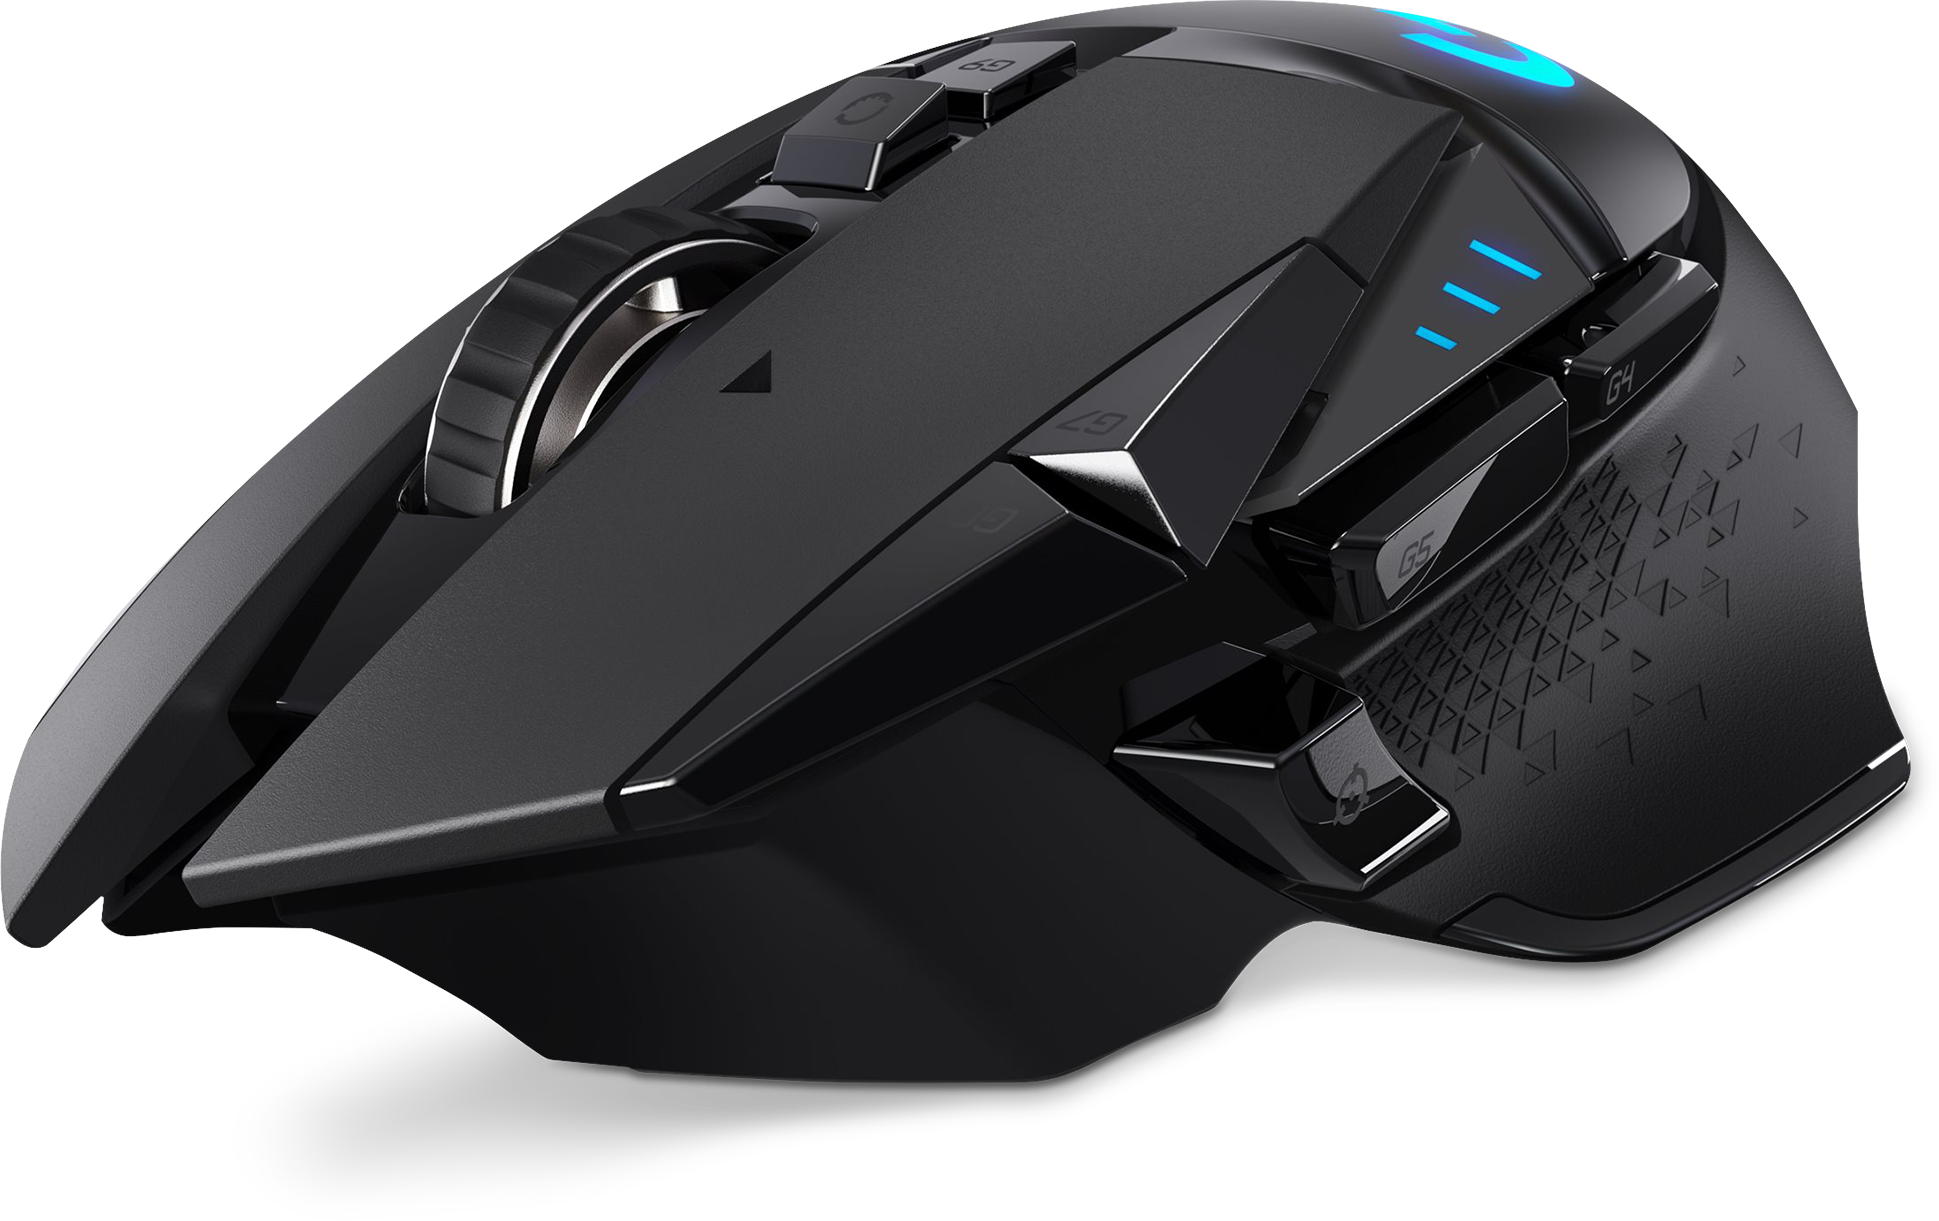 Buy Logitech G502 Gaming Mouse Microsoft Store